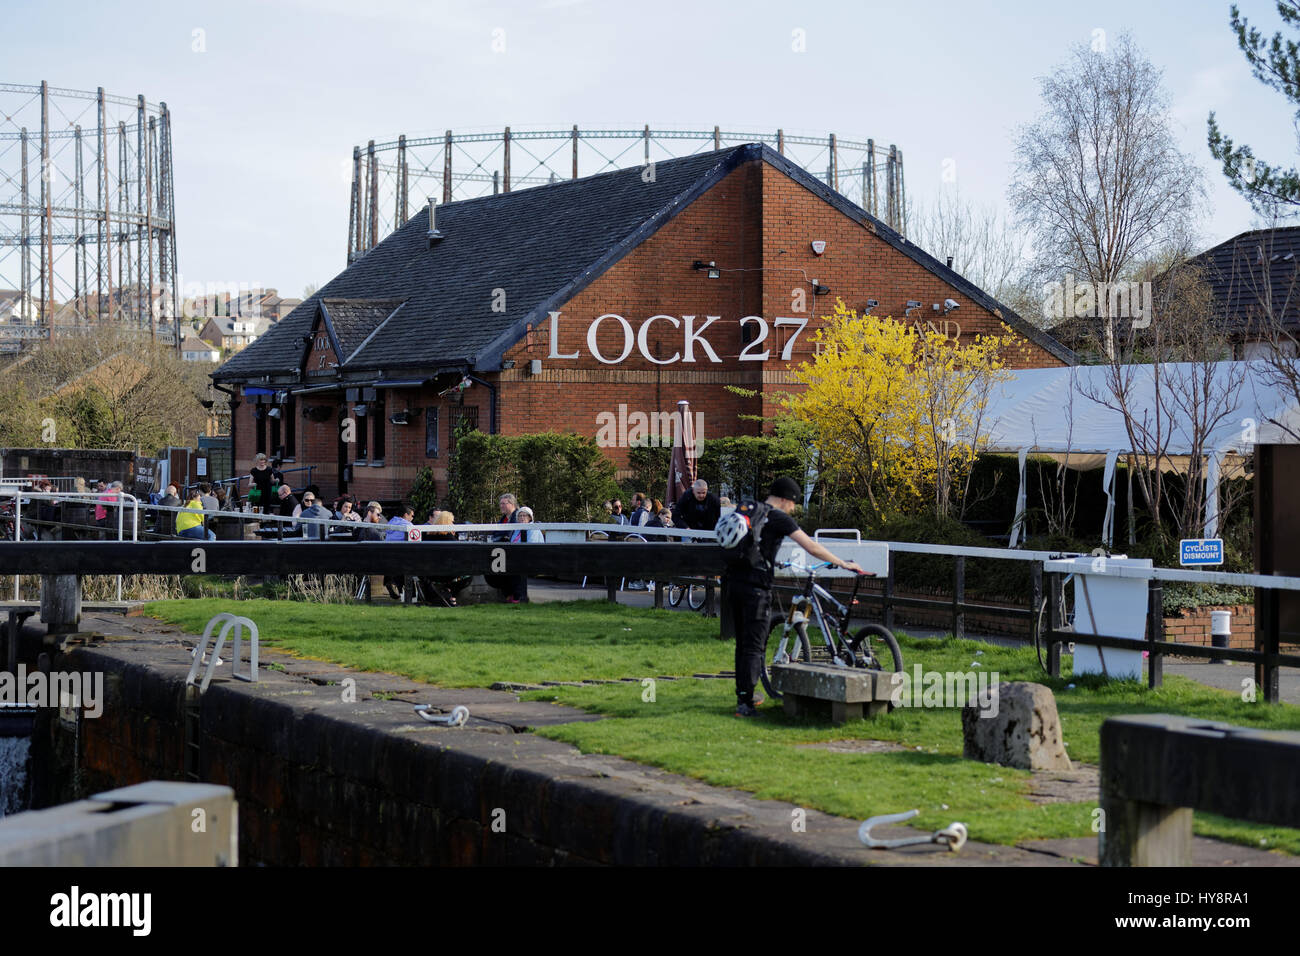 lock 27 Forth and Clyde cana pub on lock canal Stock Photo